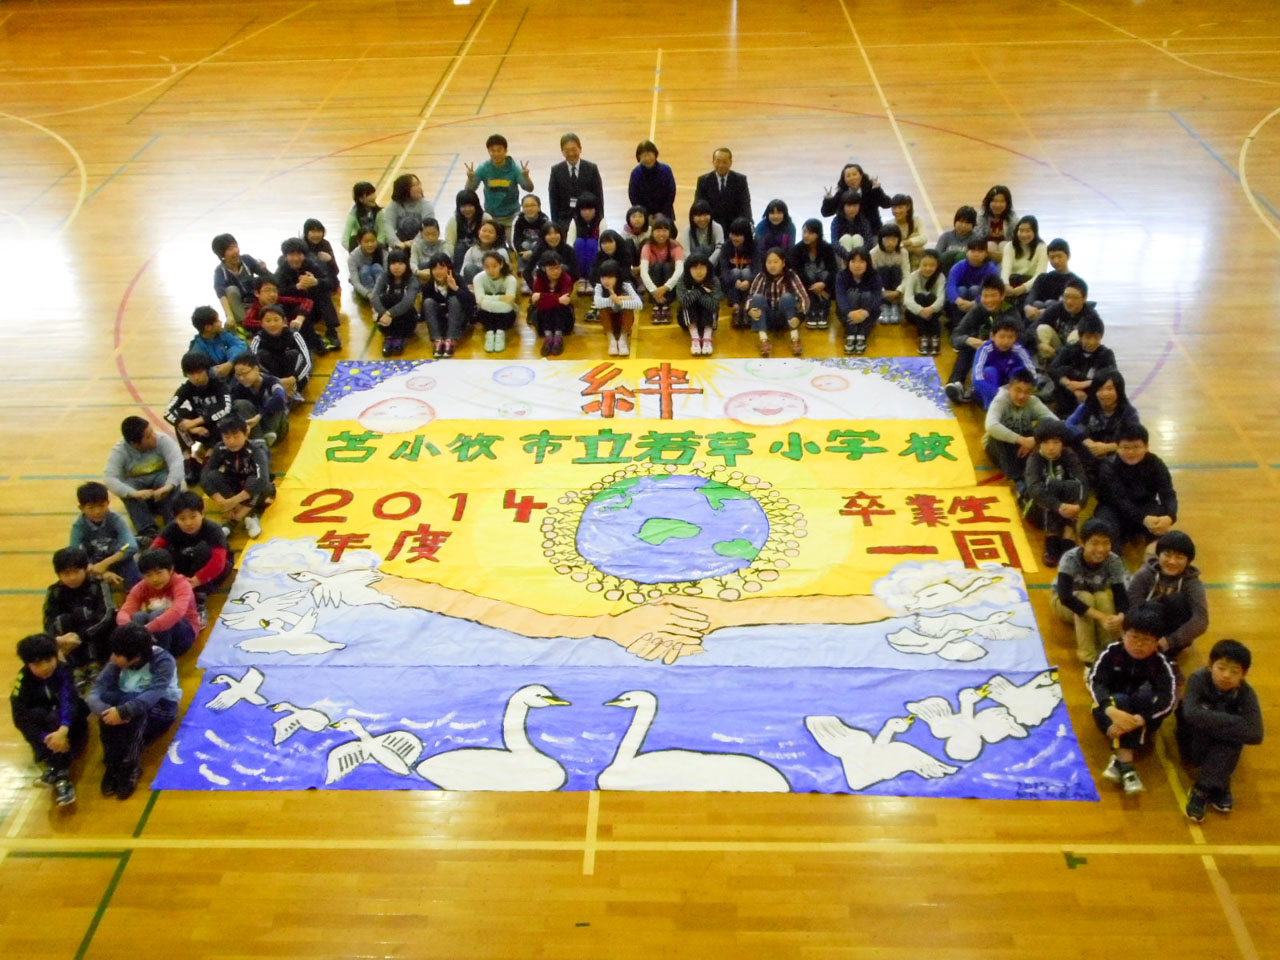 The Biggest Painting in the World 2020 in Tomakomai was completed at Wakakusa elementary school in Tomakomai.